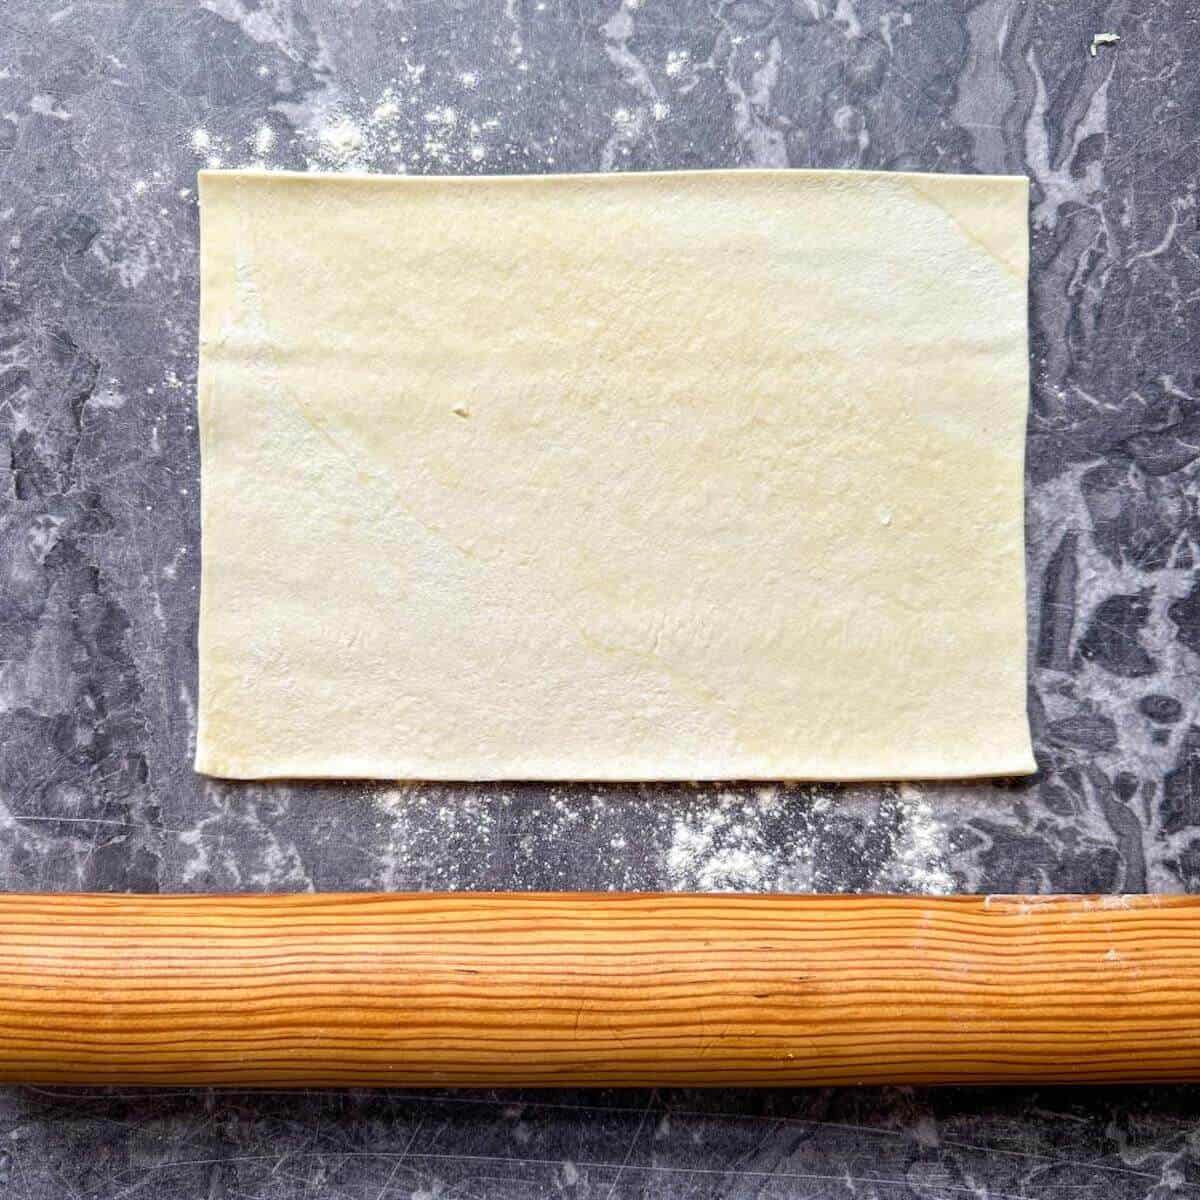 A rolling pin next to a piece of puff pastry.